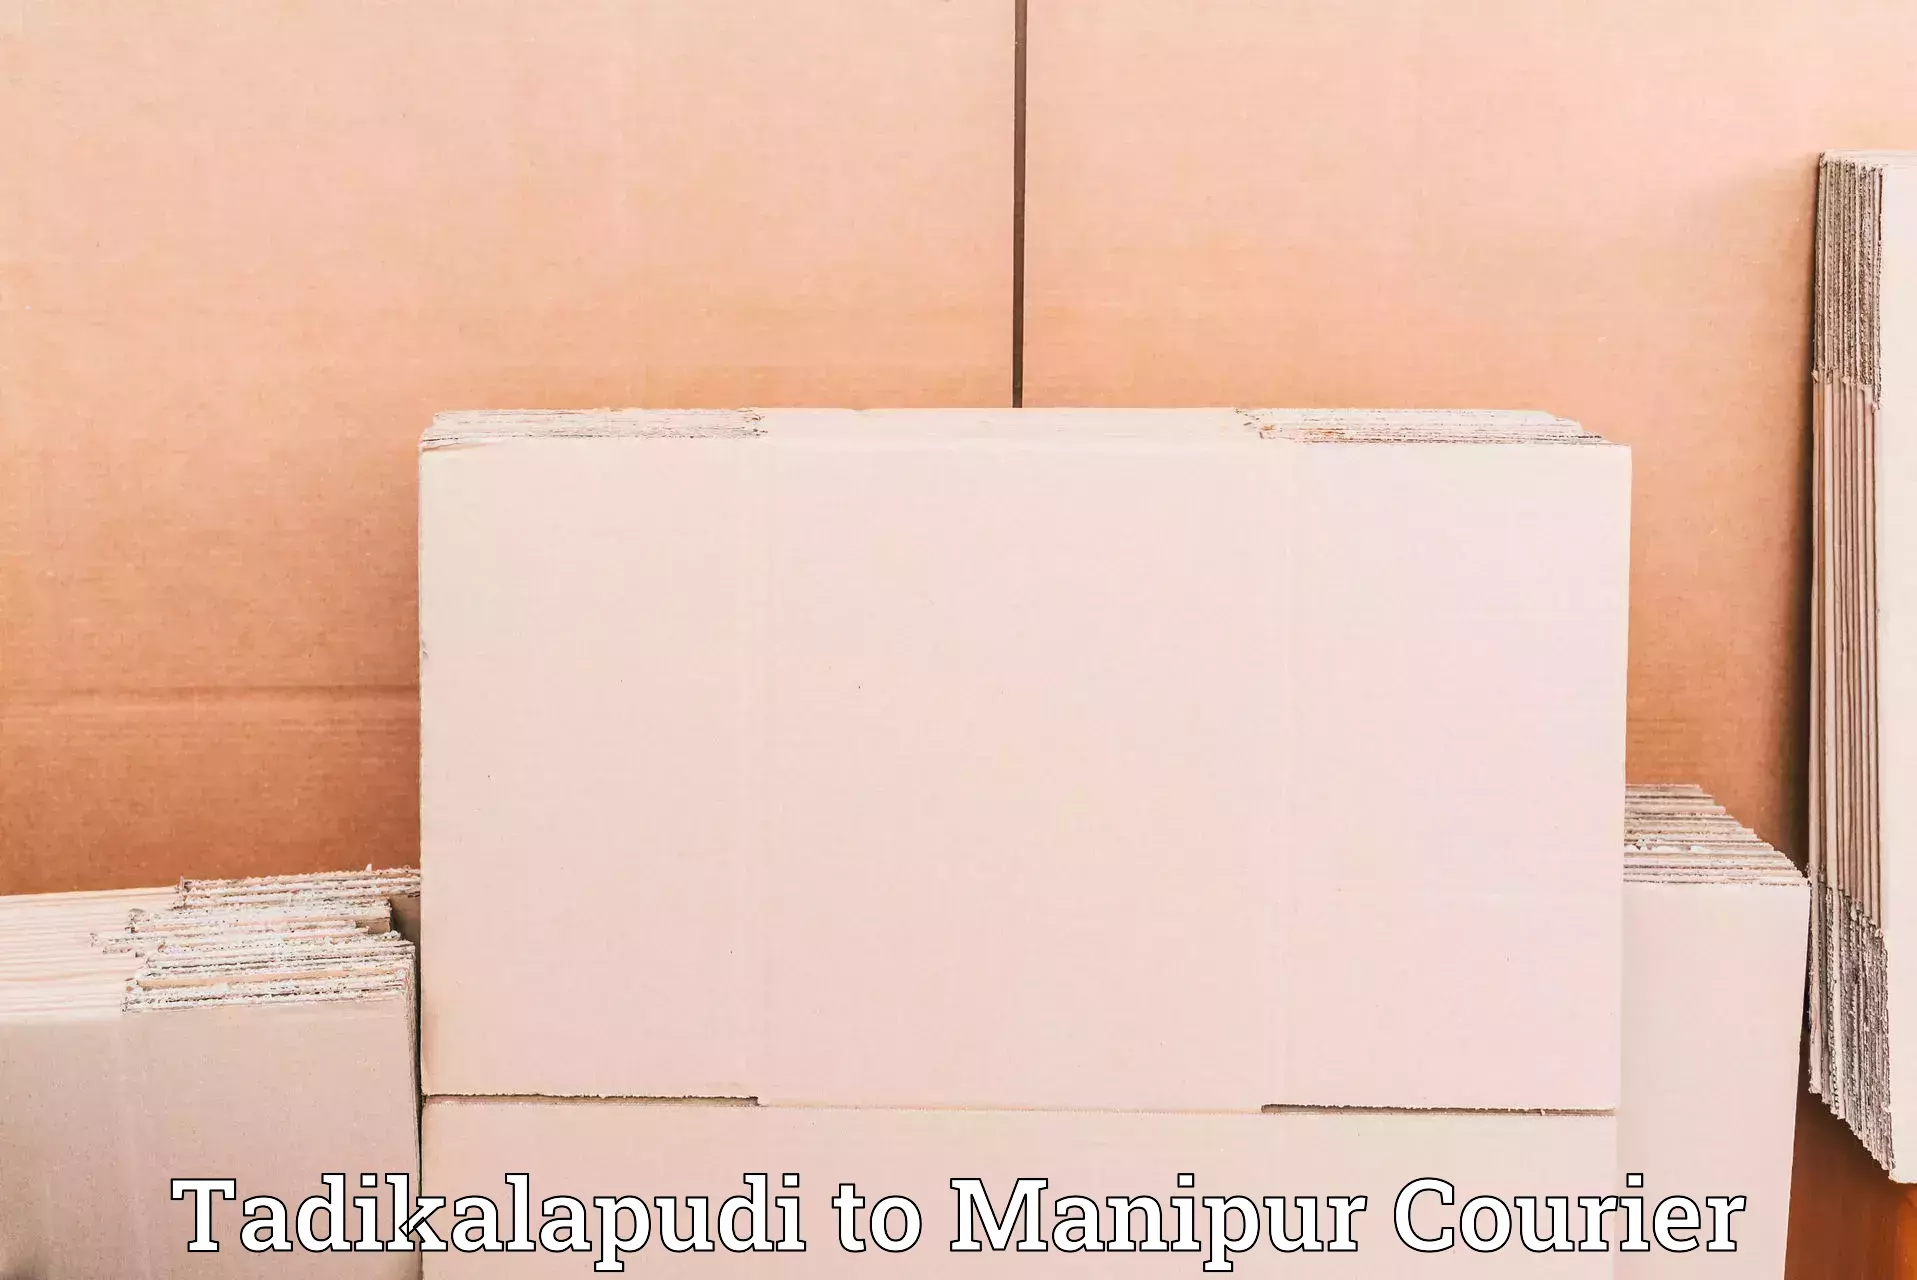 State-of-the-art courier technology Tadikalapudi to Imphal